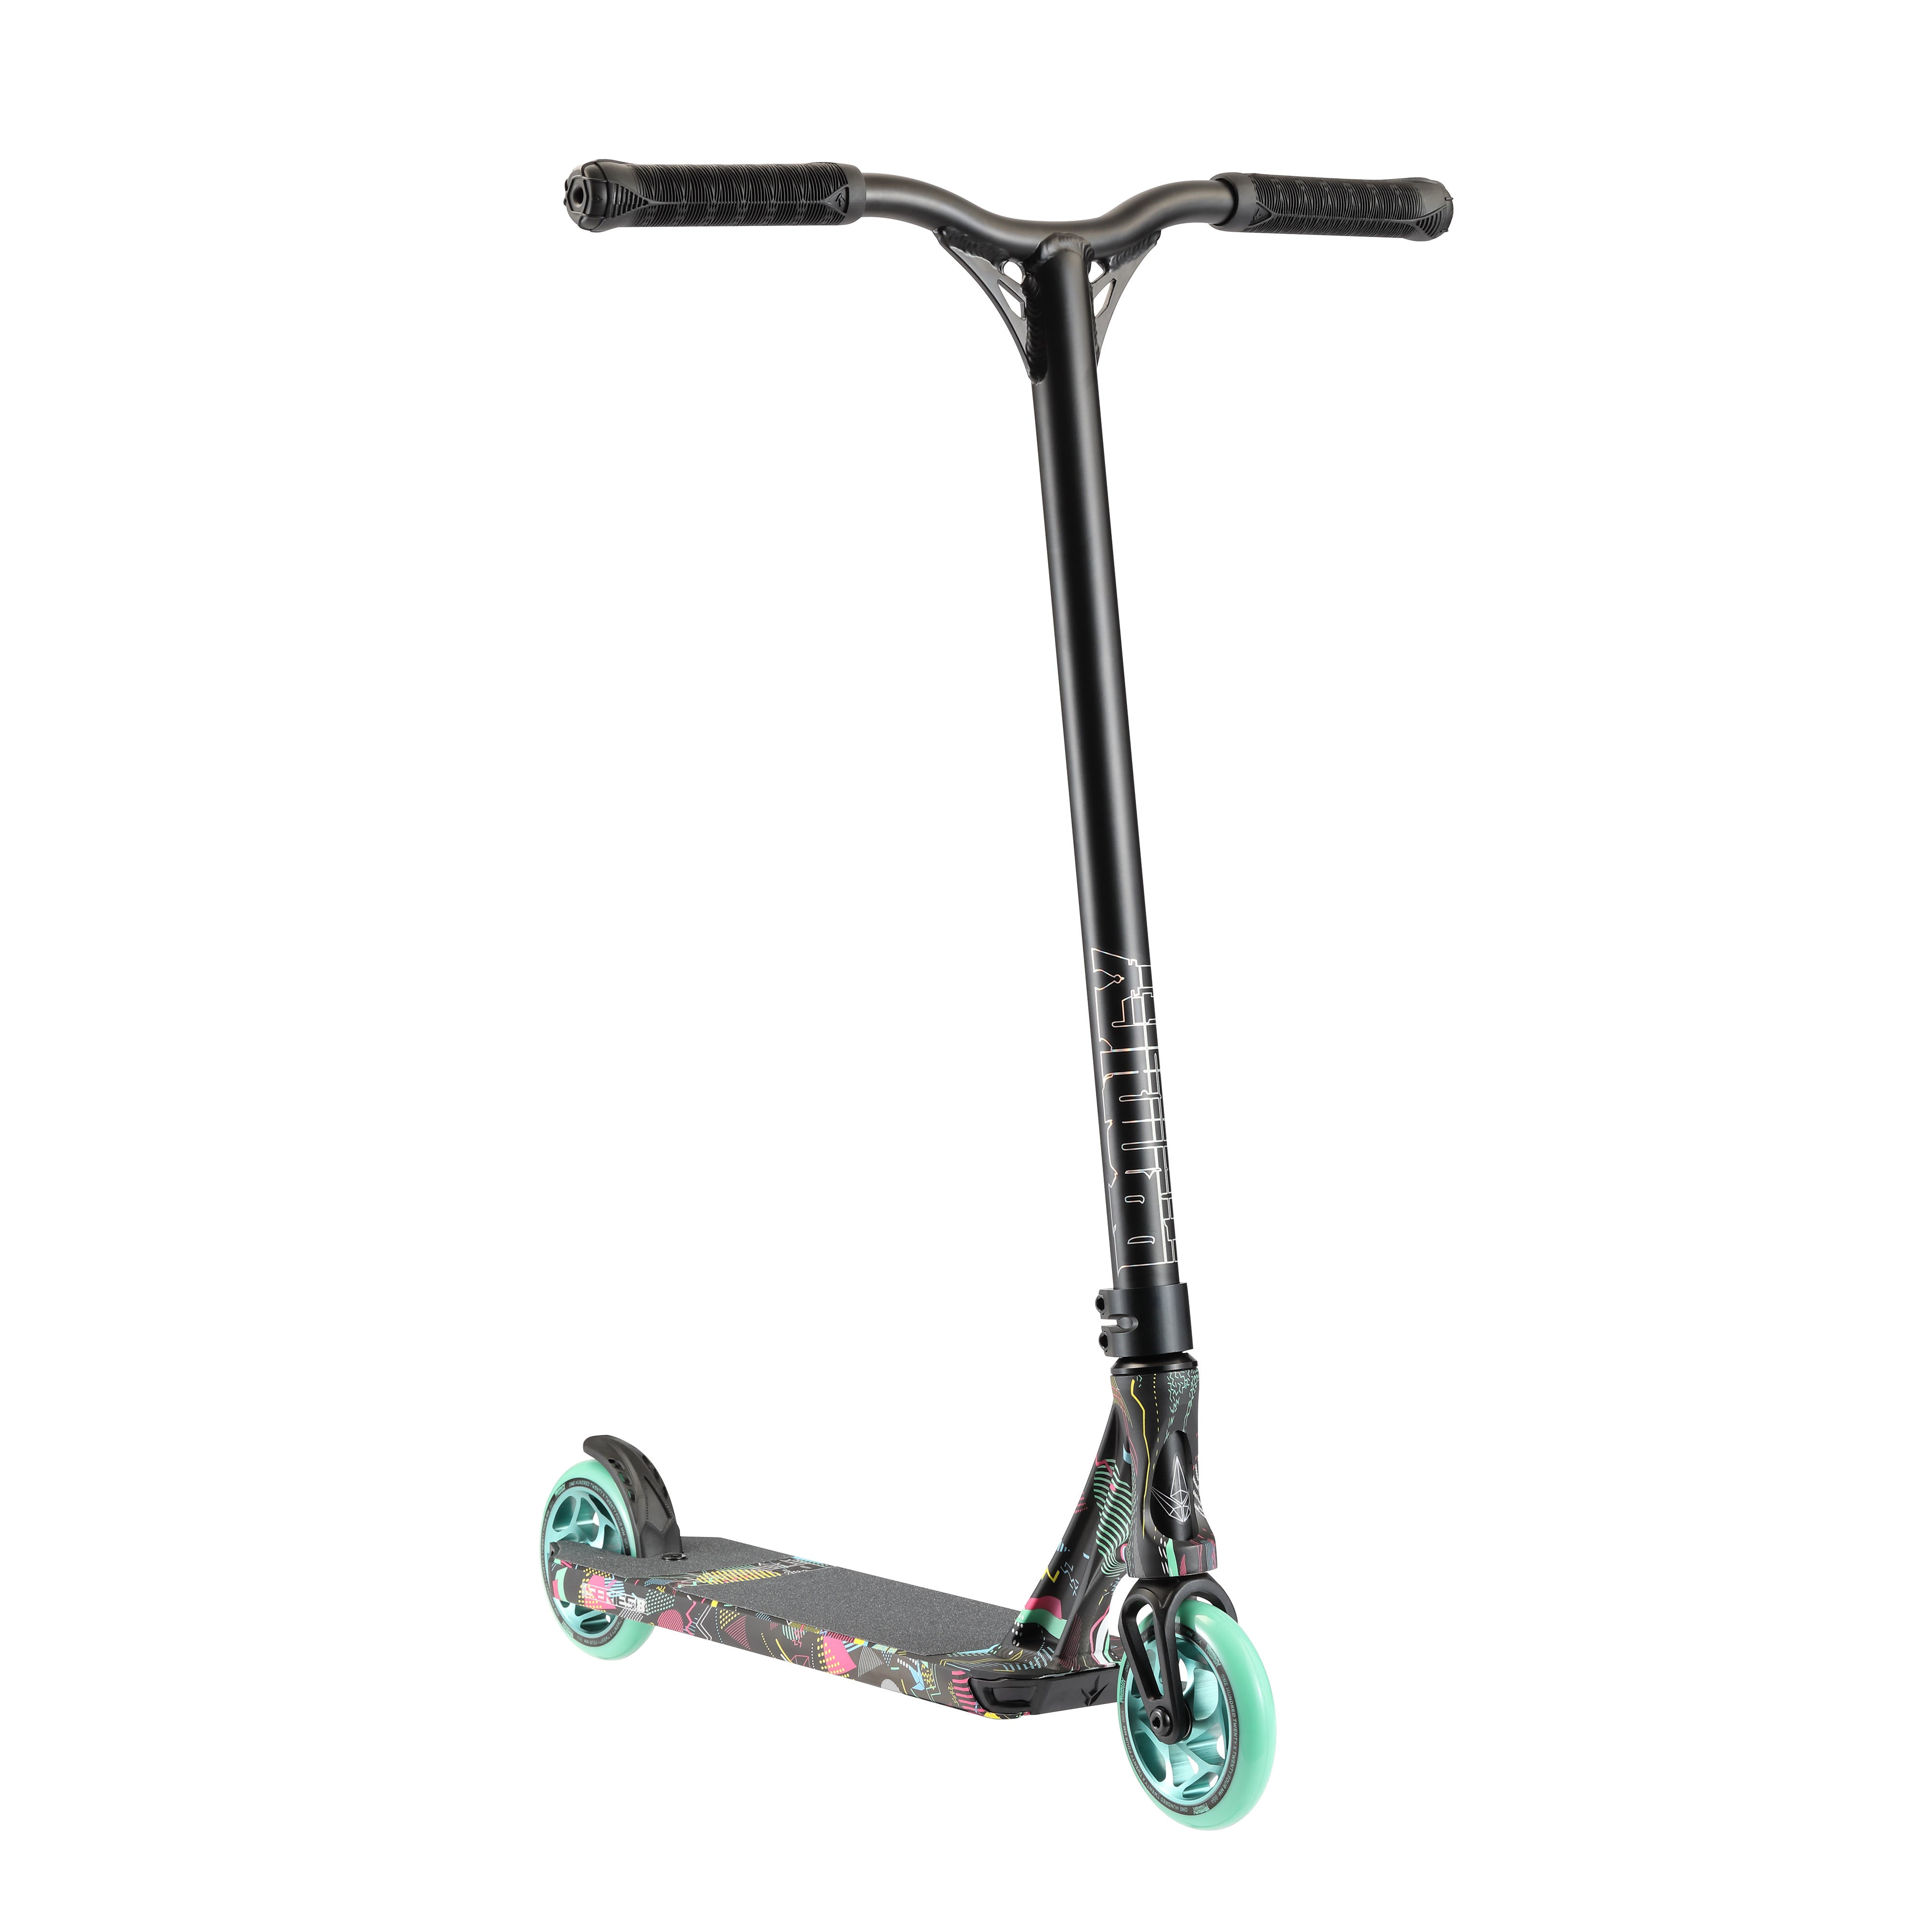 Envy Prodigy S8 - Scooter Complete Retro 